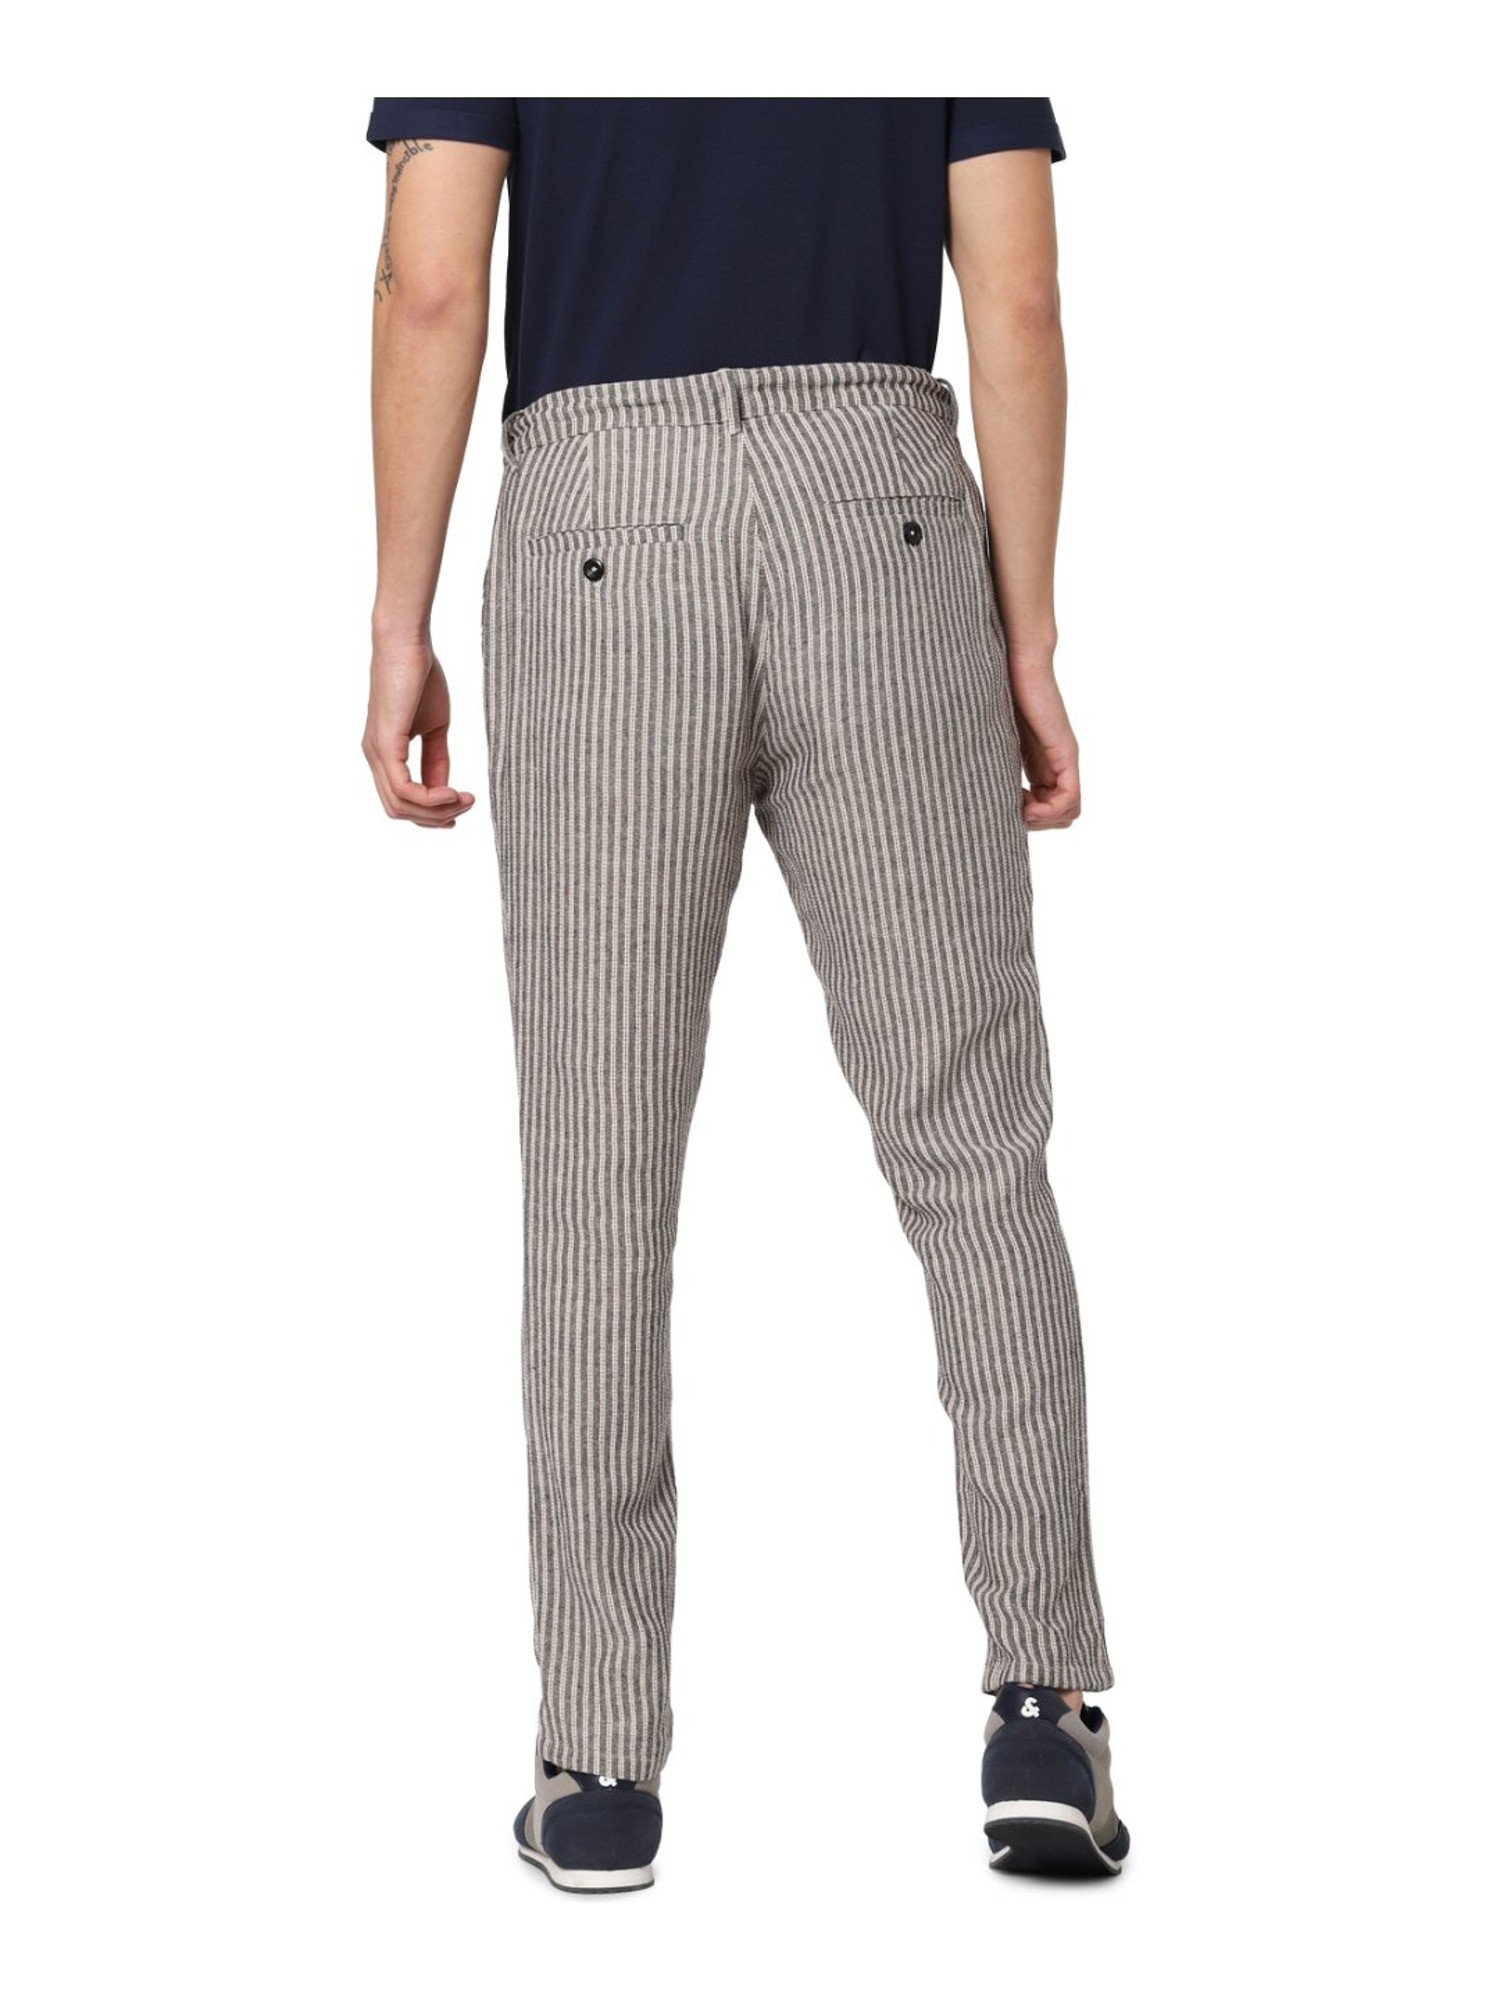 BOSS  Slimfit formal trousers with drawstring waist